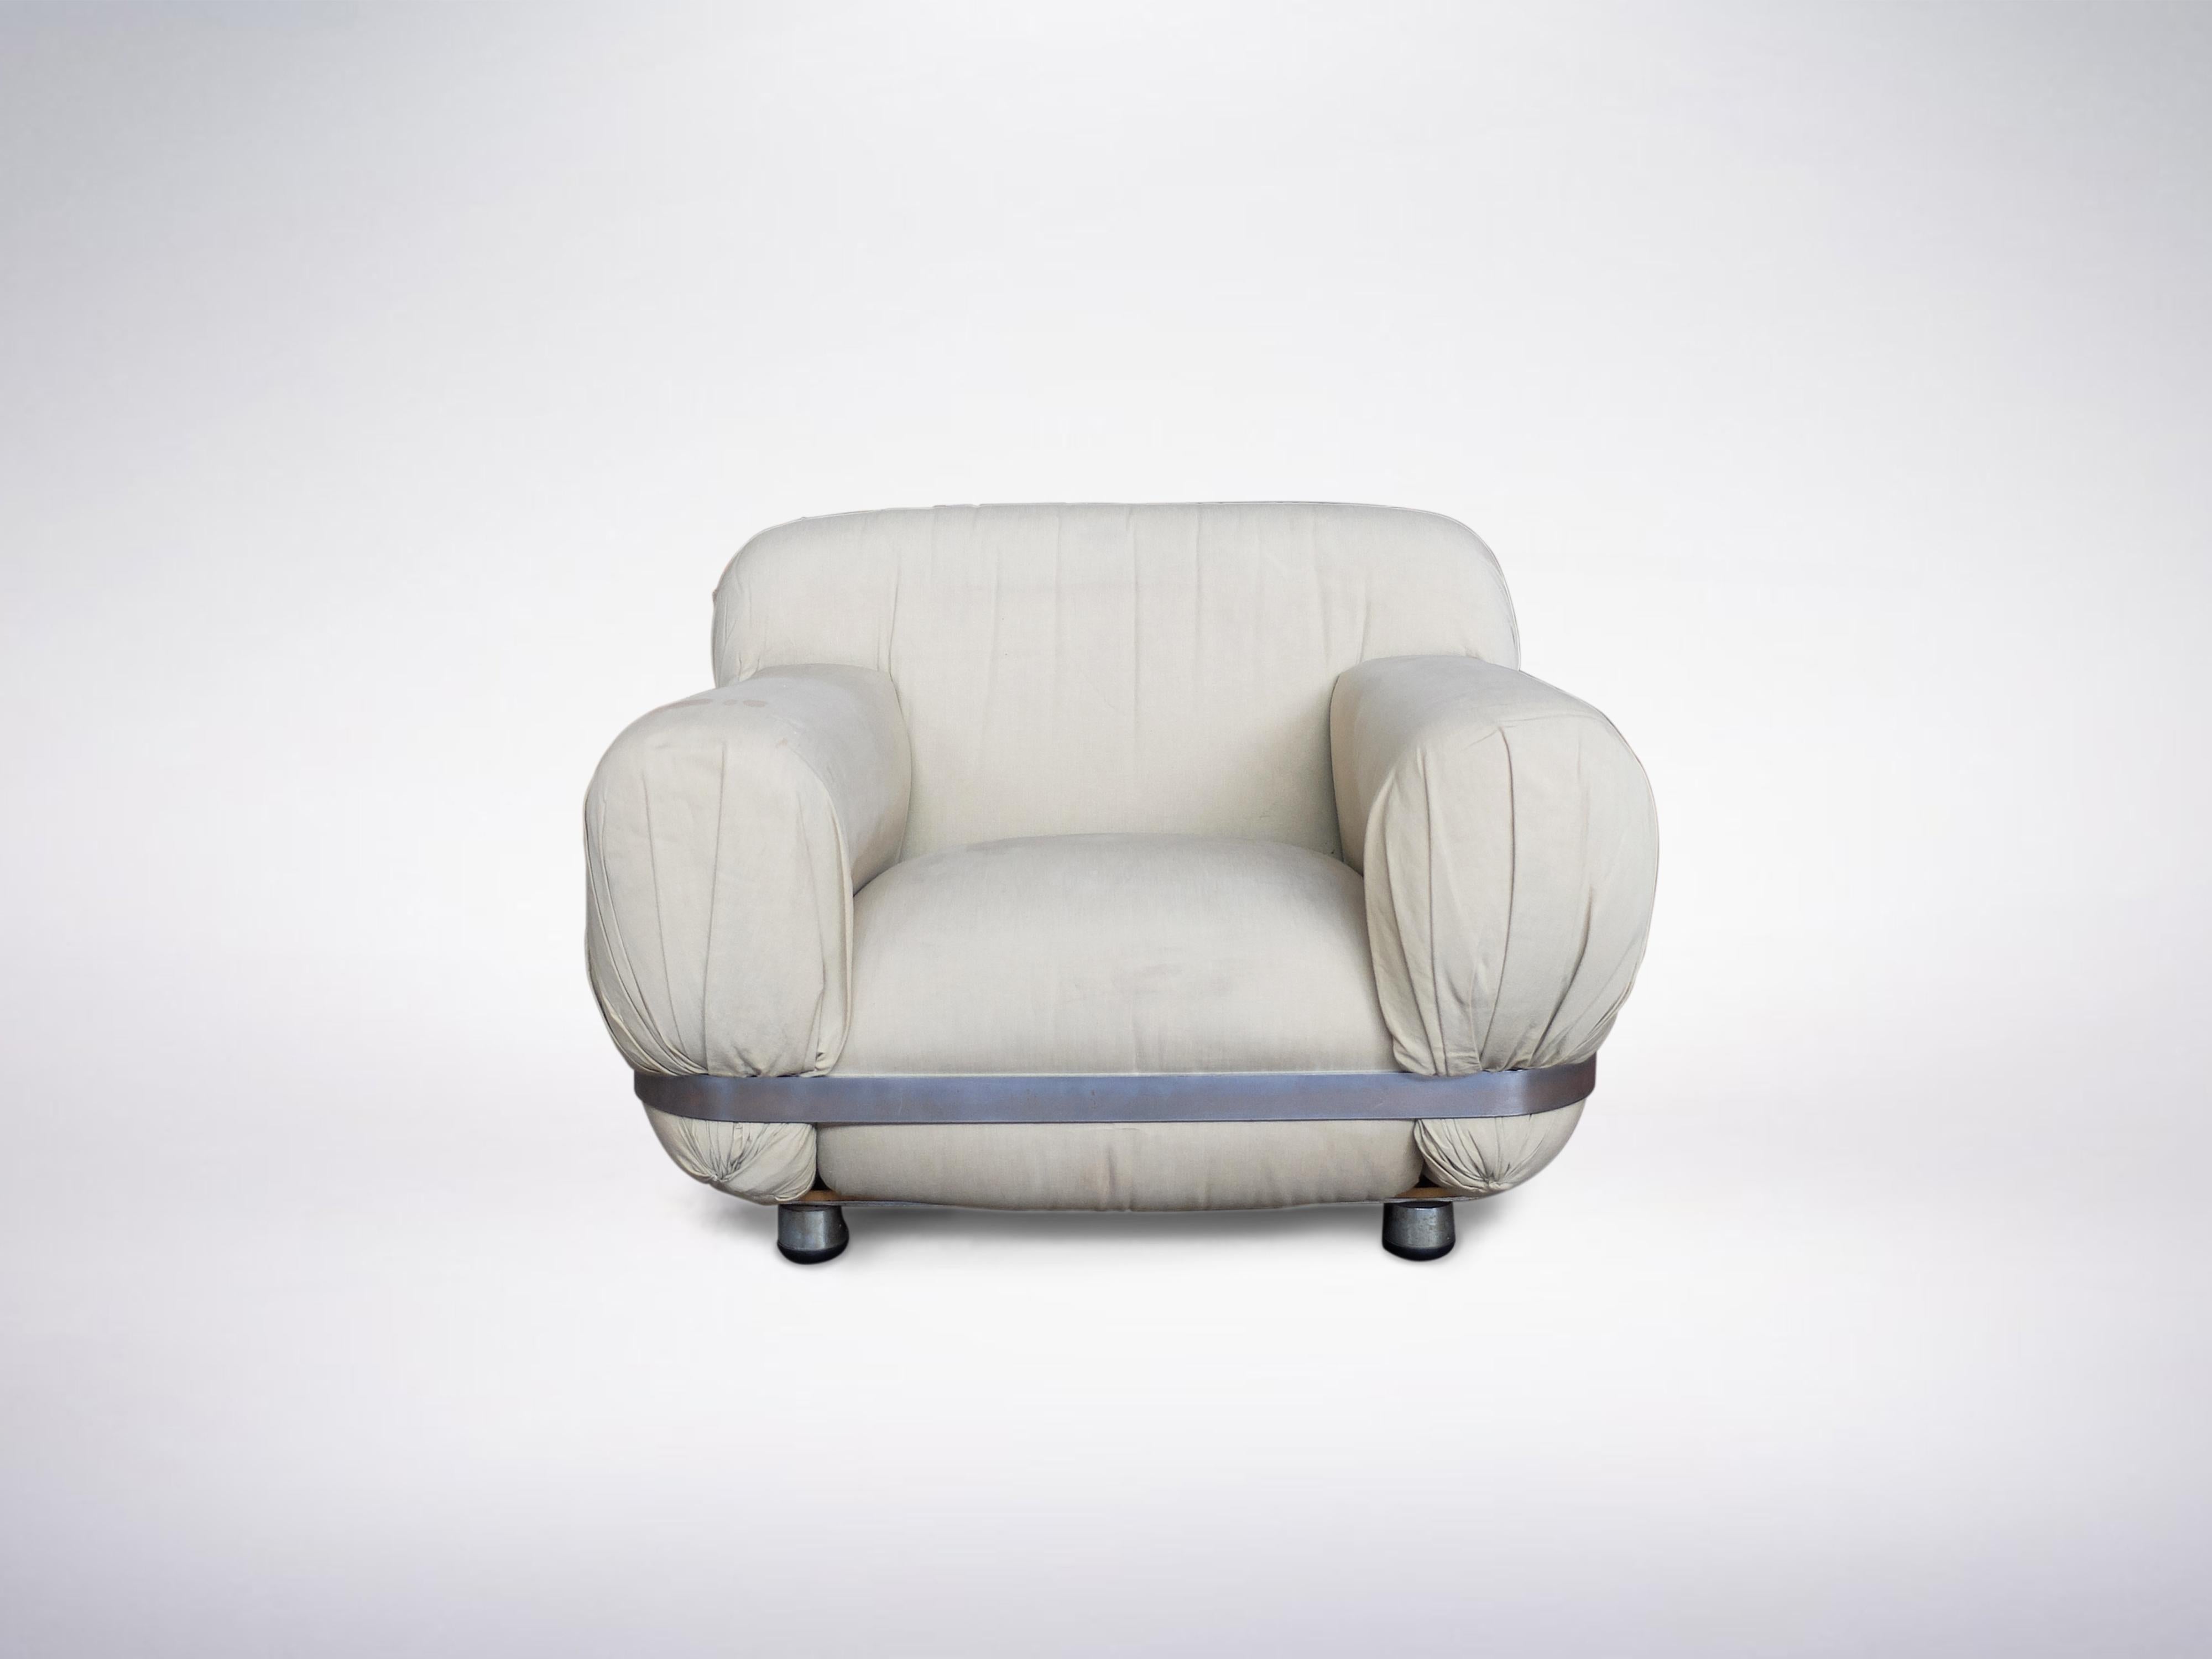 Ico Parisi, Italian mid-century one-off commissioned armchair, 1971.



Please note : the 